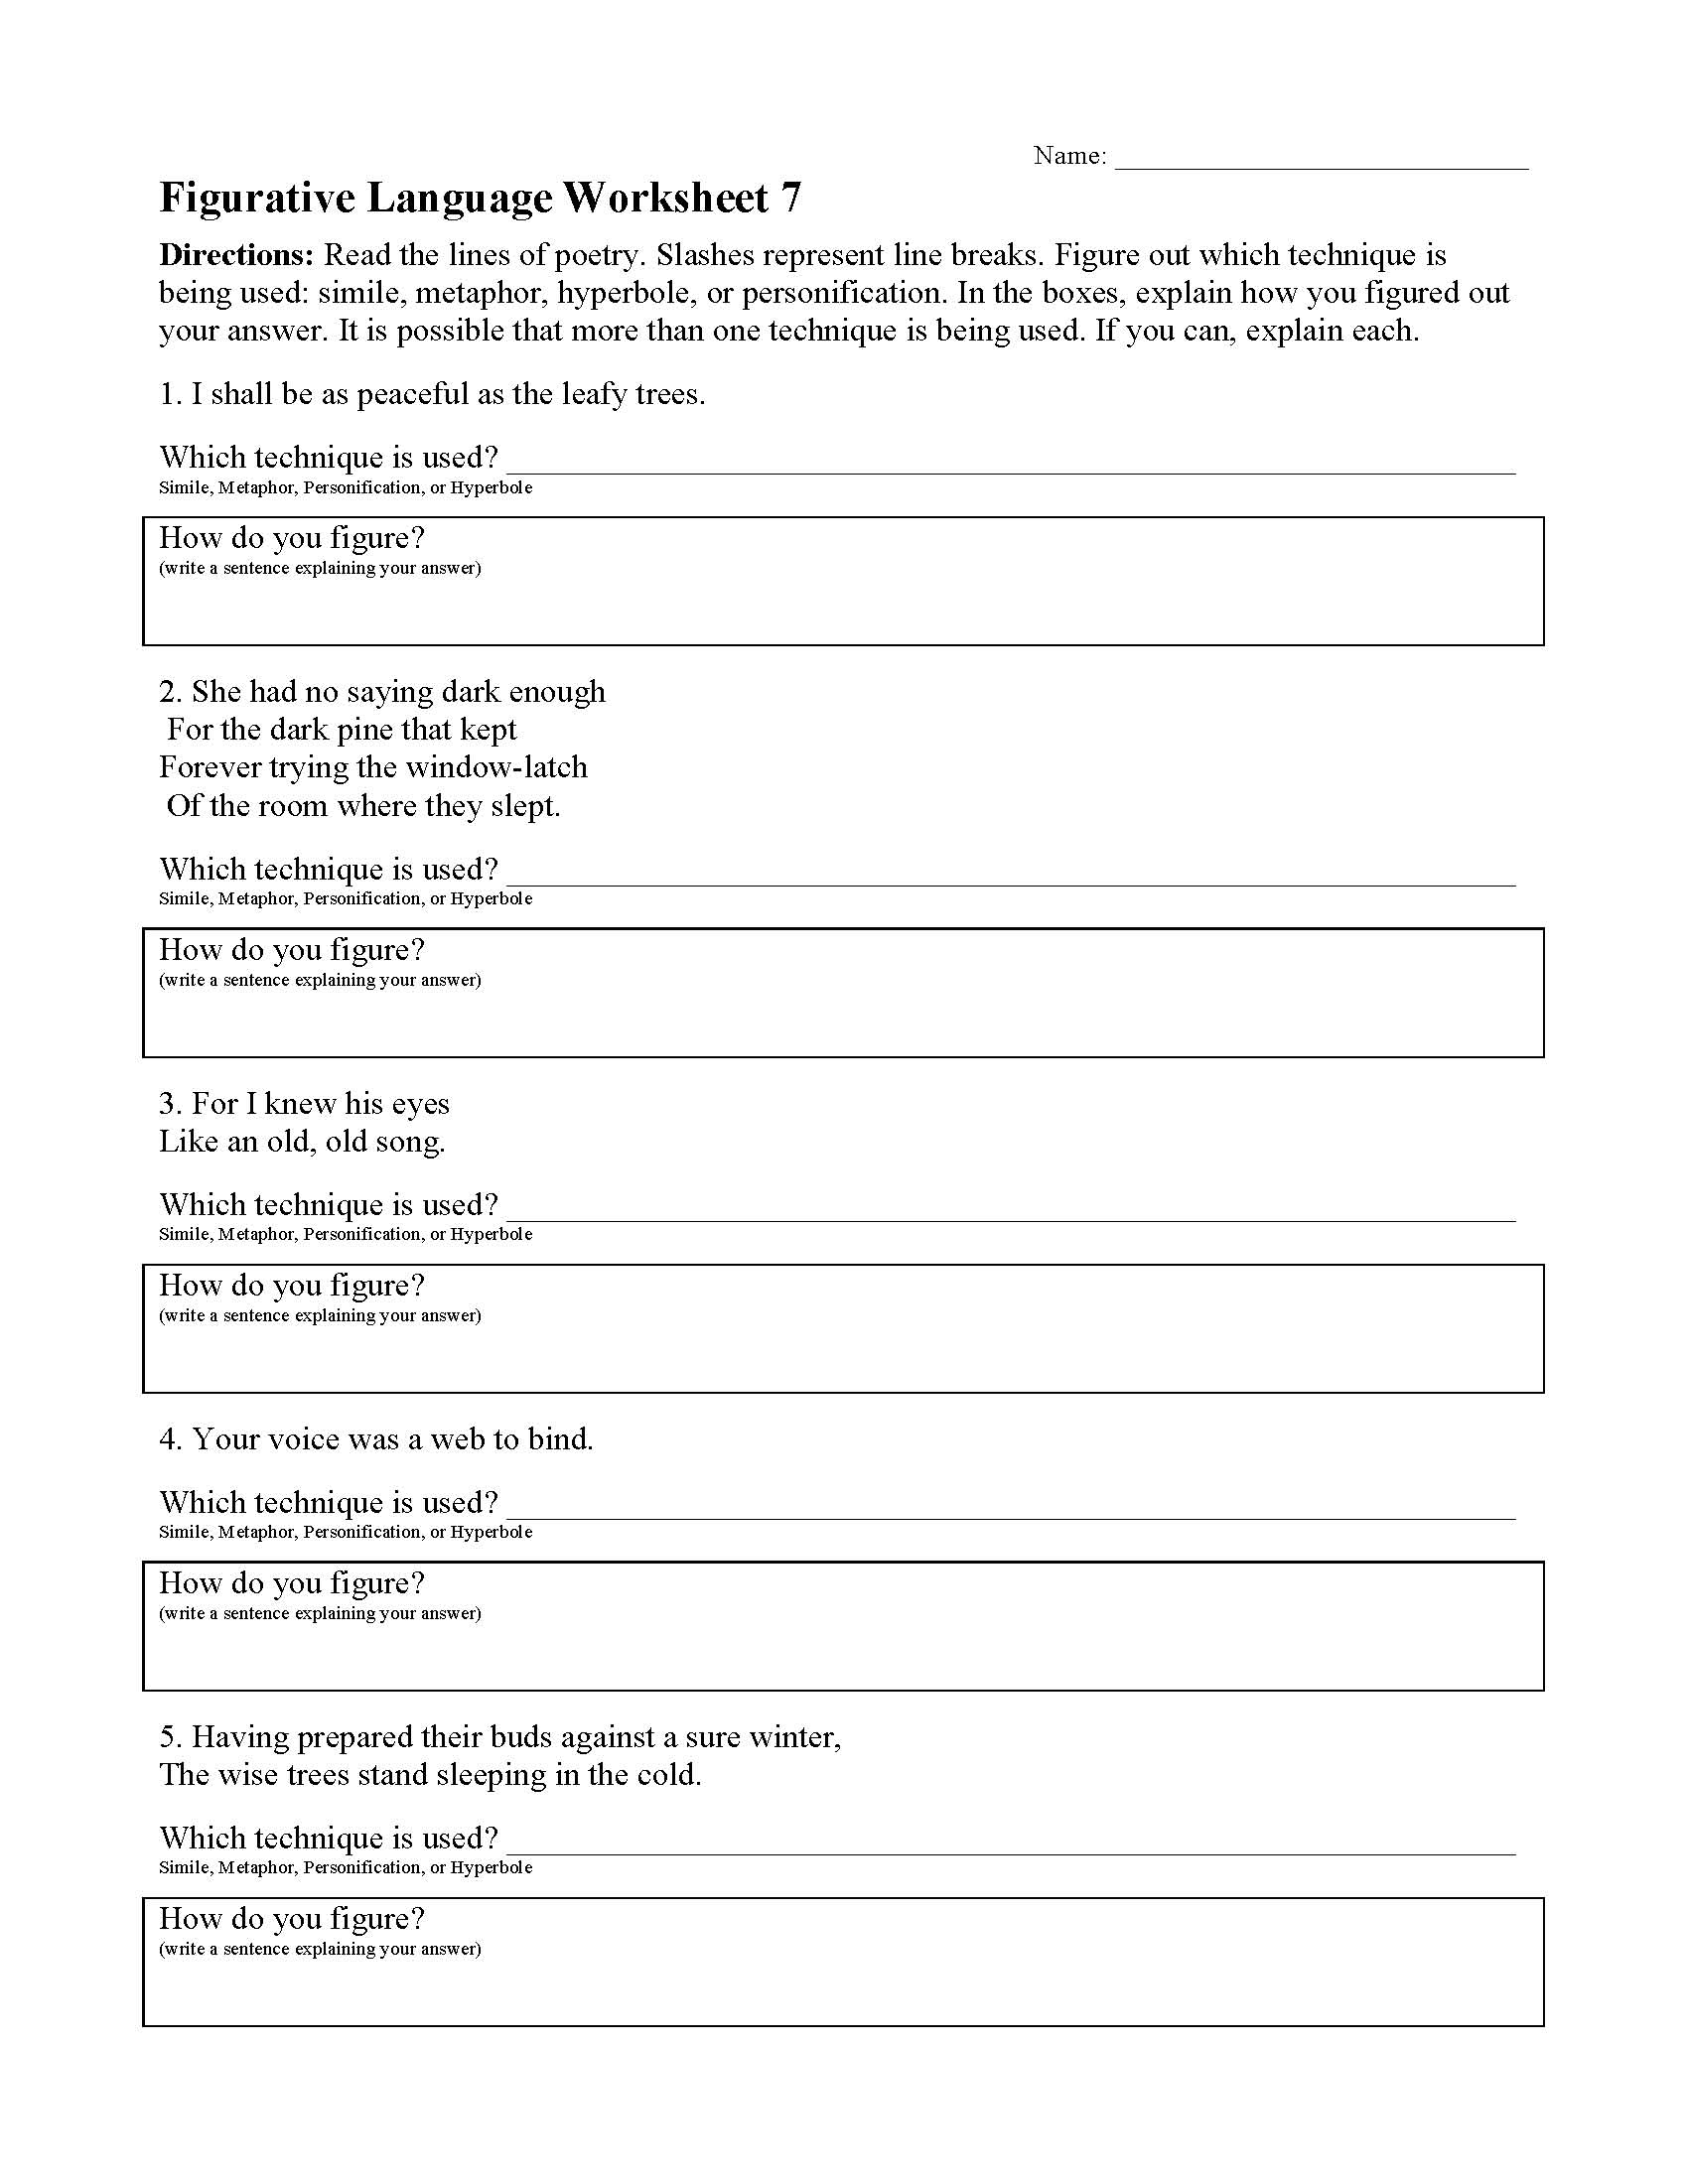 This is a preview image of Figurative Language Worksheet 7. Click on it to enlarge it or view the source file.